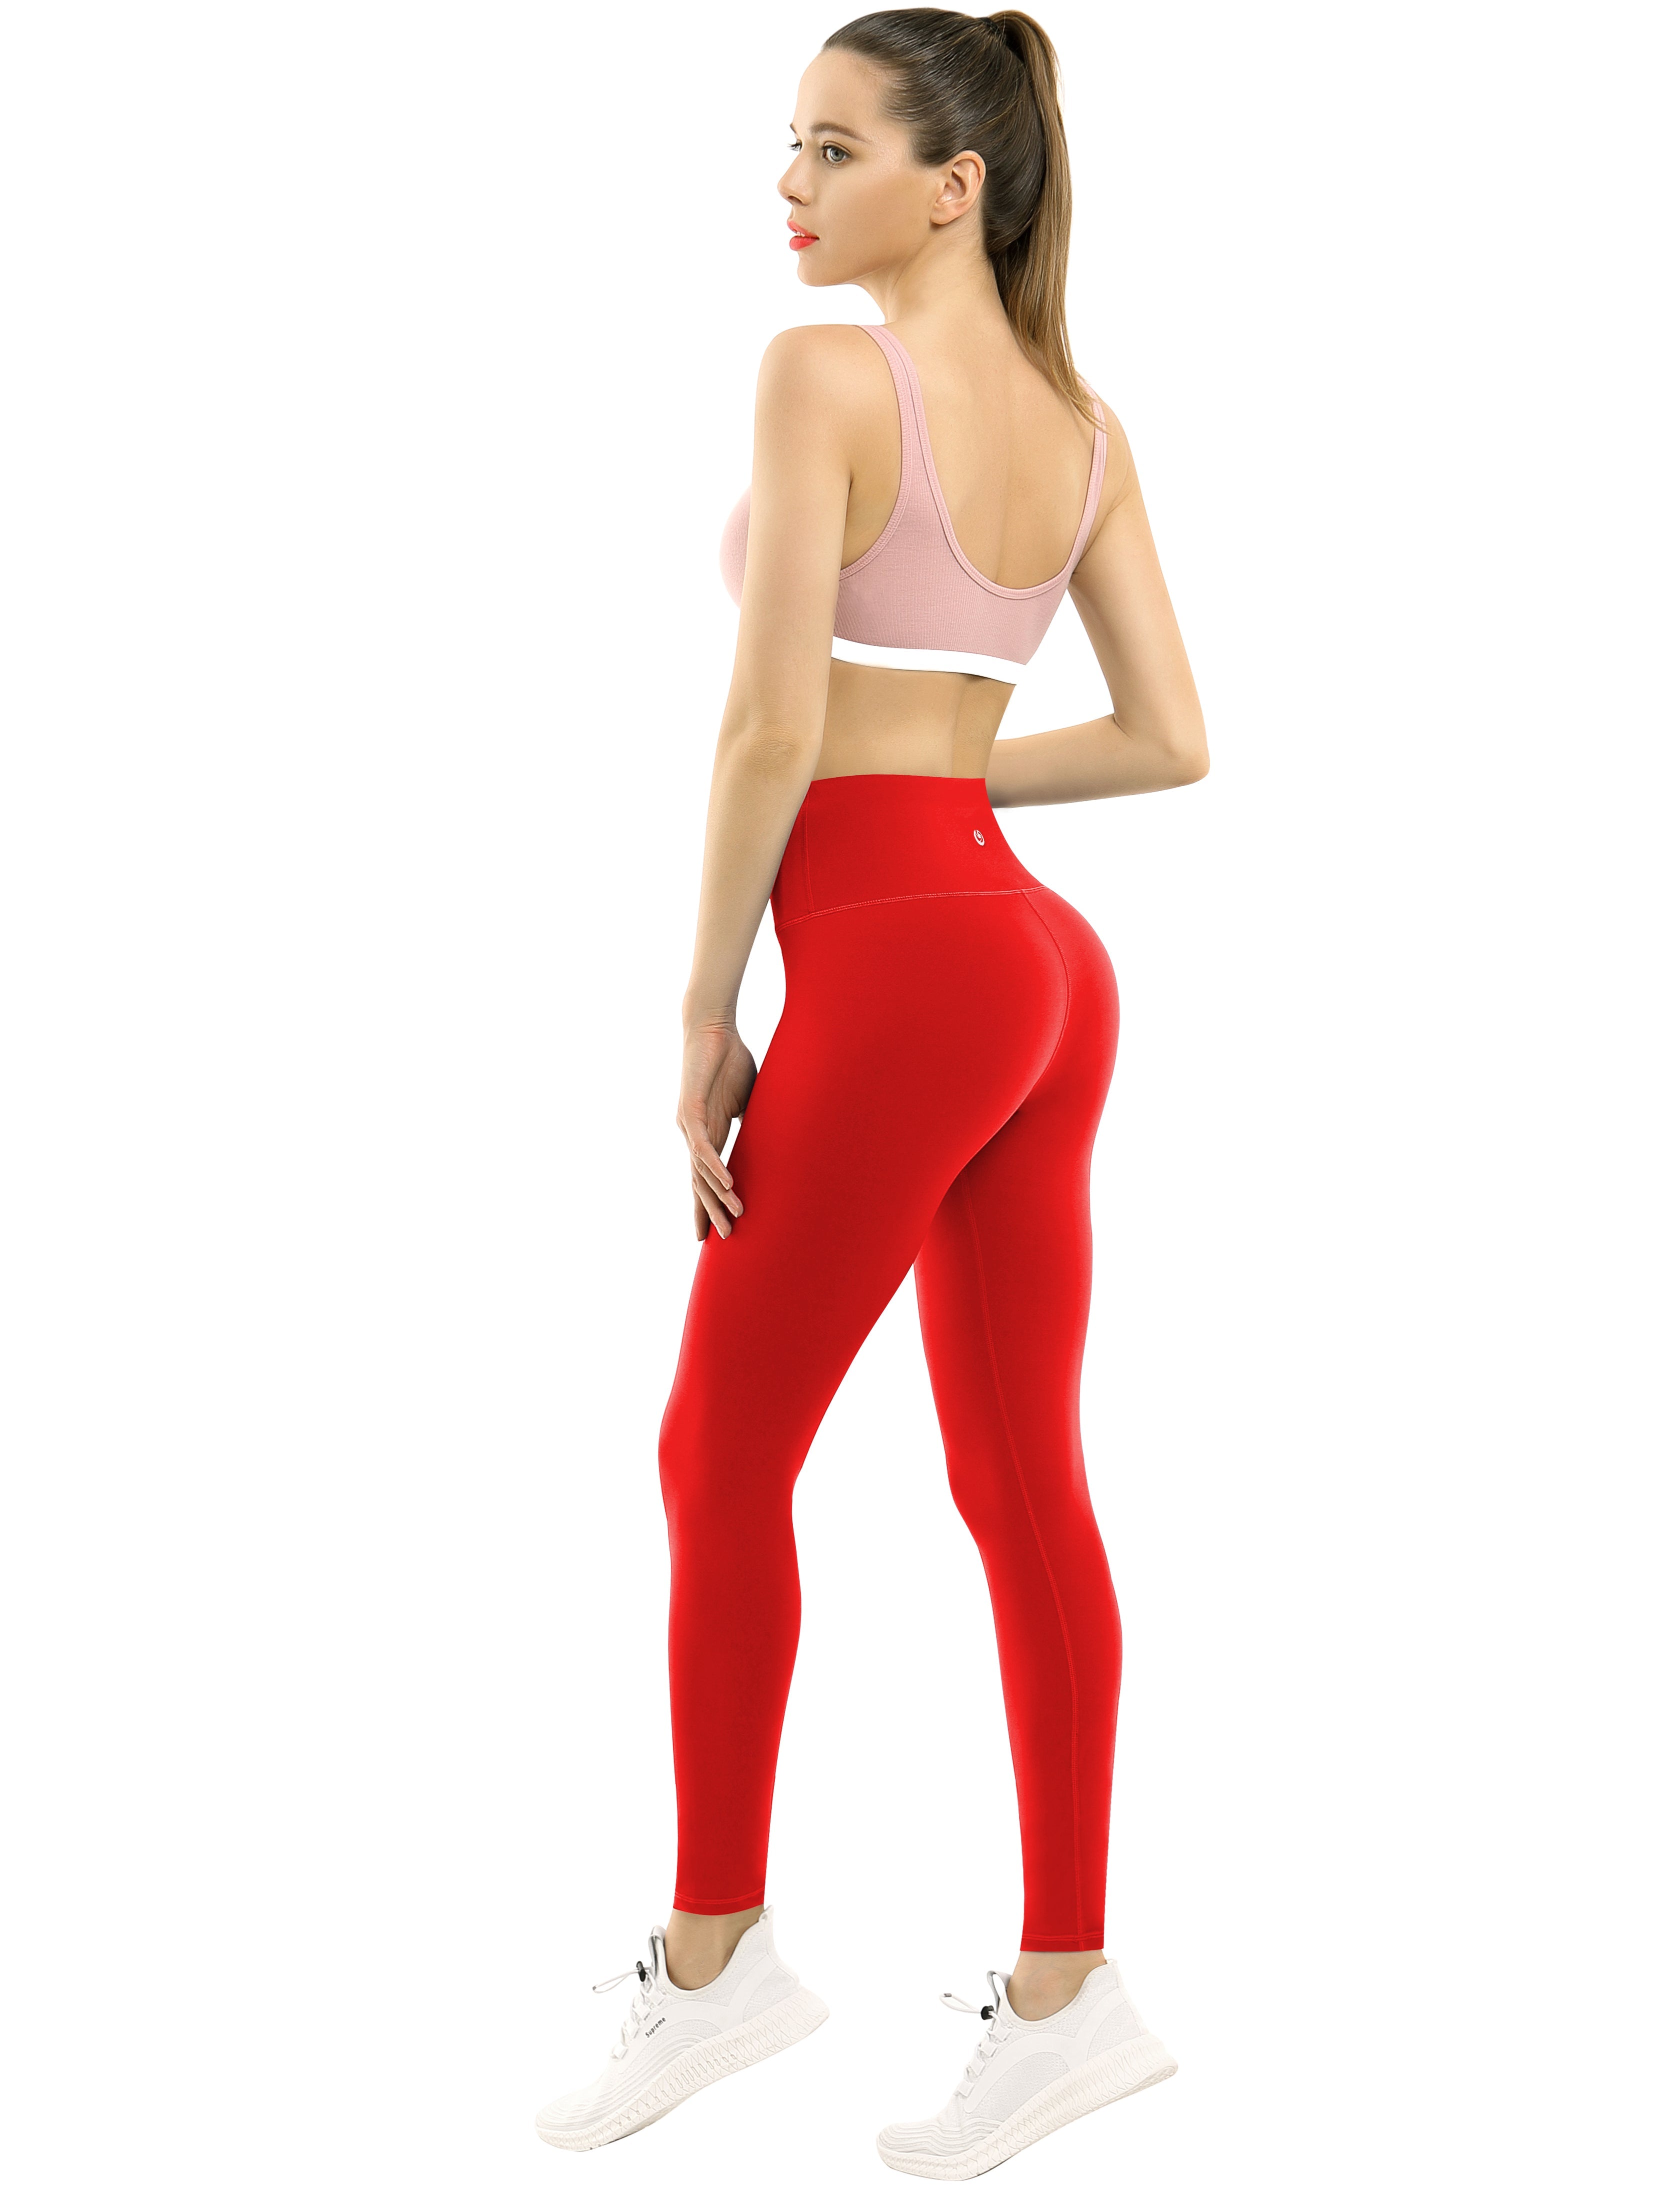 High Waist Running Pants scarlet 75%Nylon/25%Spandex Fabric doesn't attract lint easily 4-way stretch No see-through Moisture-wicking Tummy control Inner pocket Four lengths